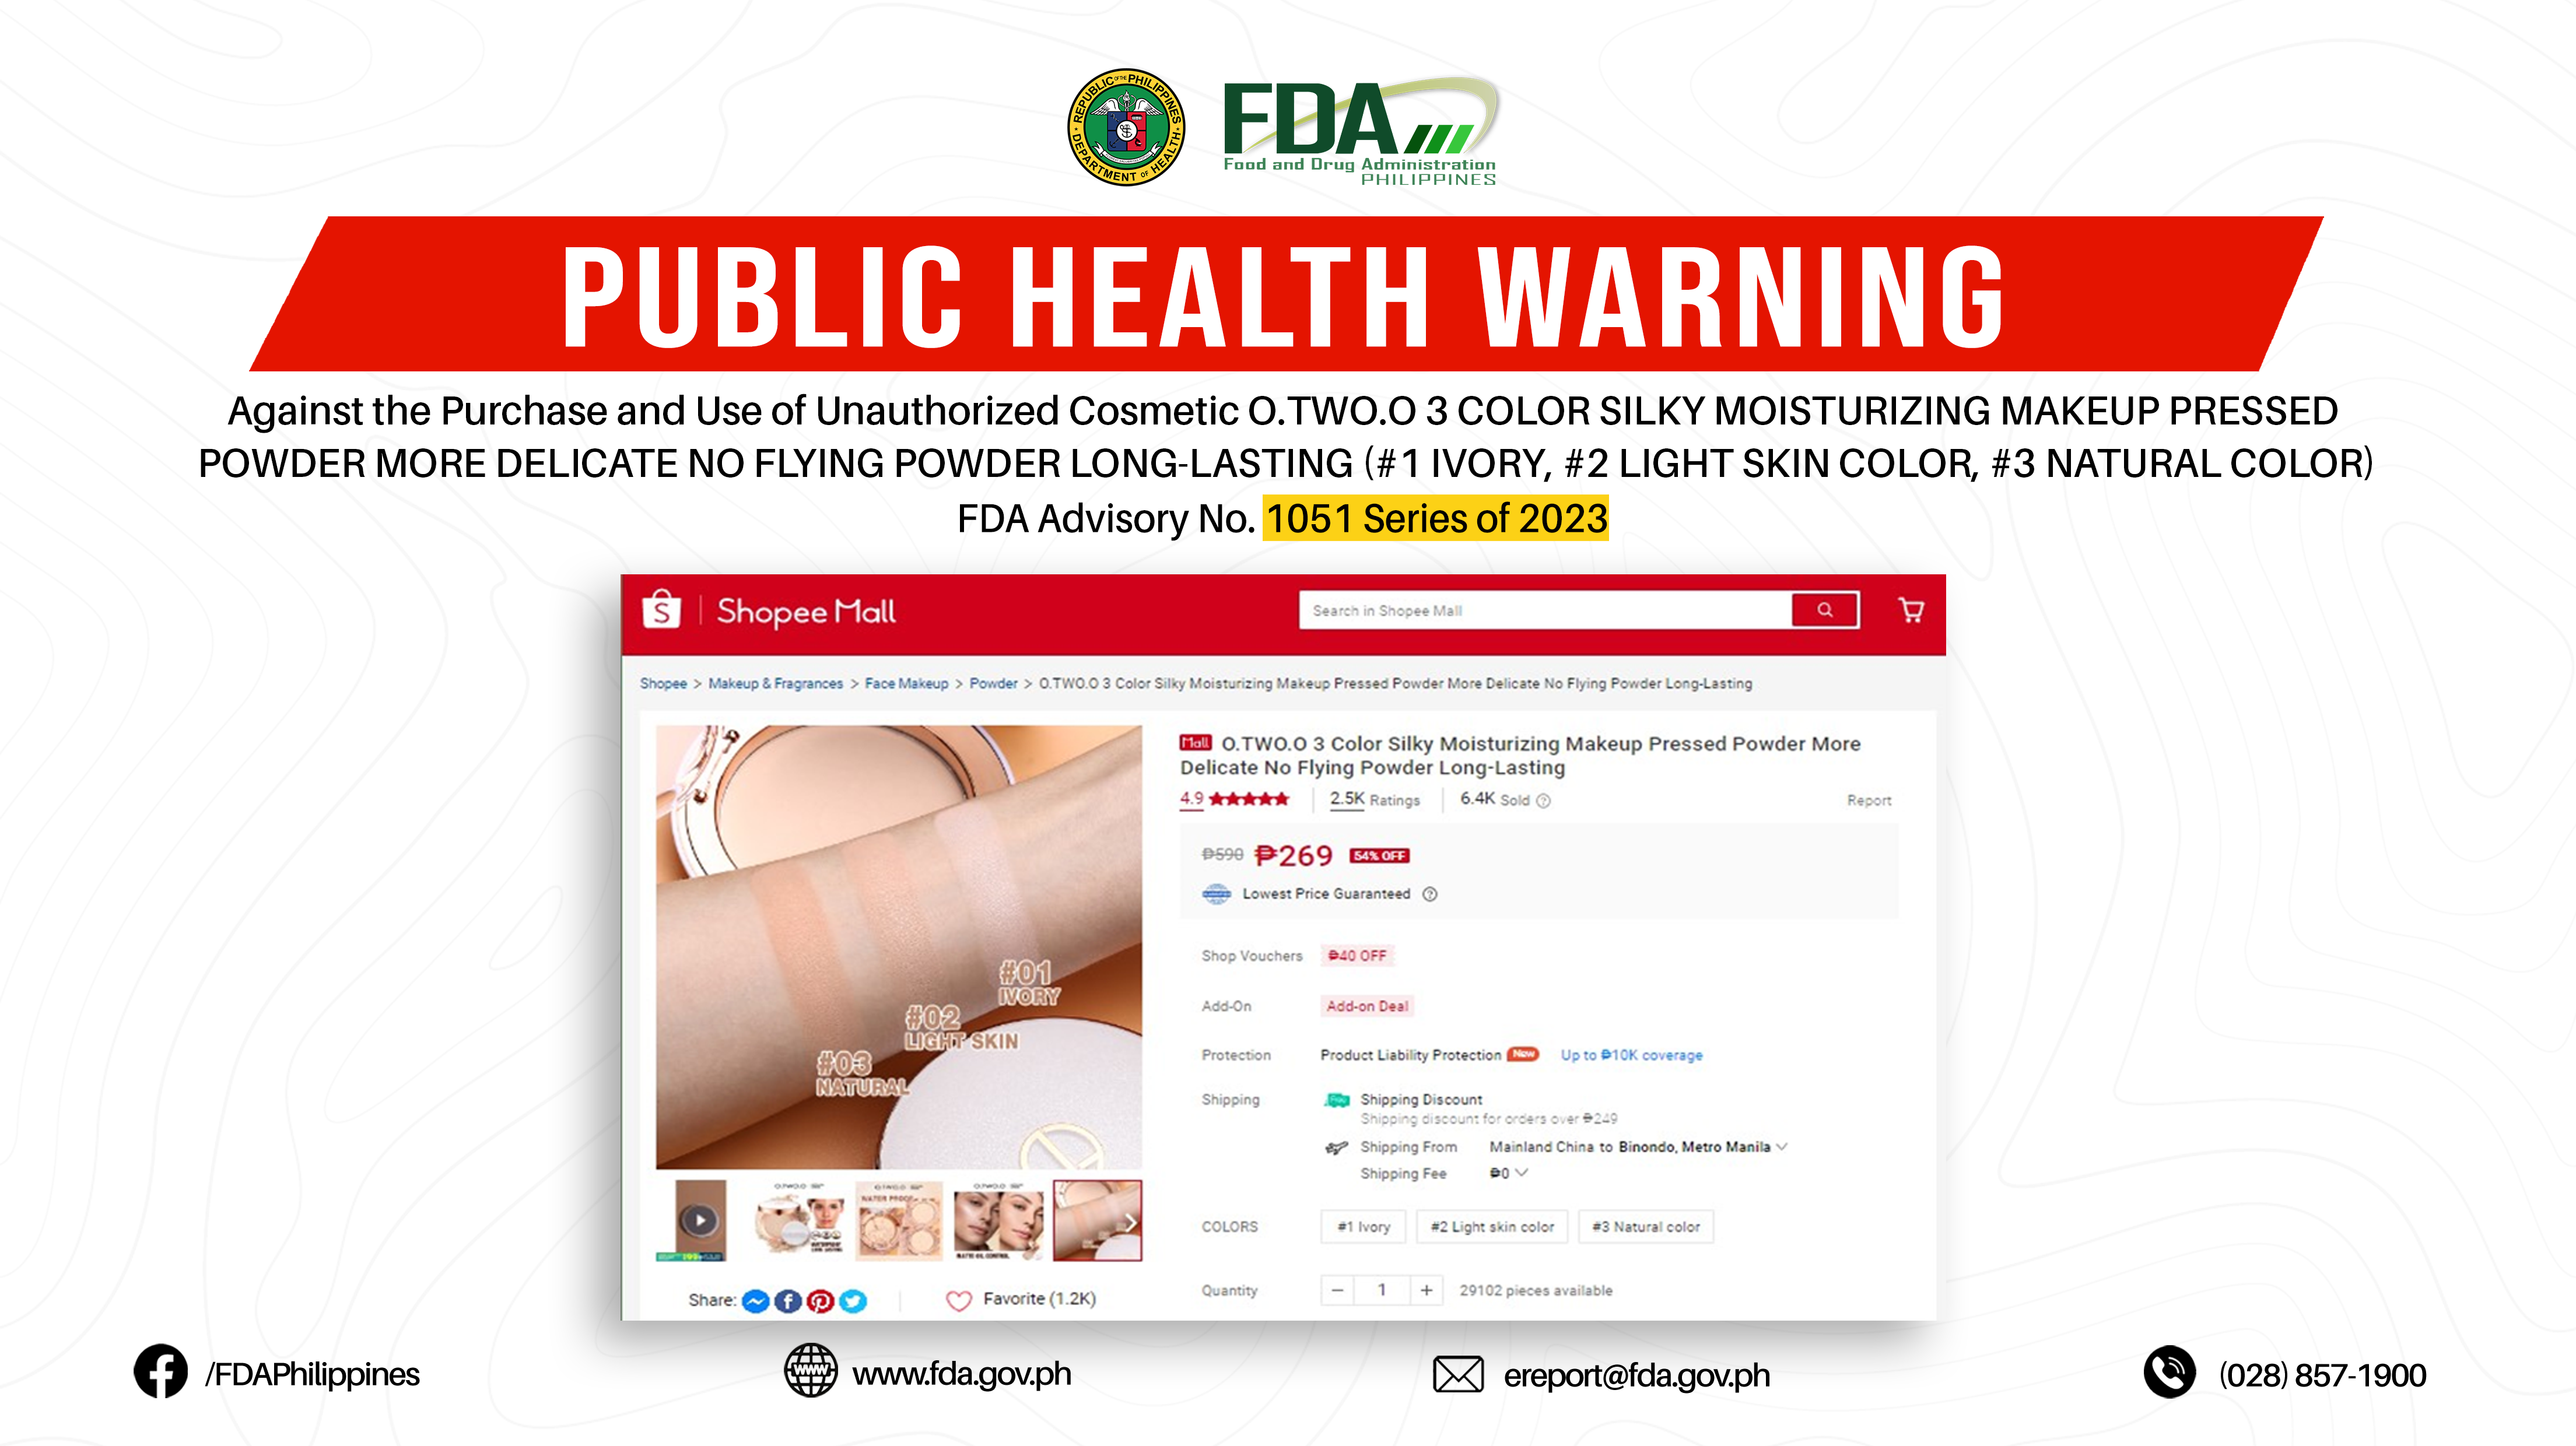 FDA Advisory No.2023-1051 || Public Health Warning Against the Purchase and Use of Unauthorized Cosmetic O.TWO.O 3 COLOR SILKY MOISTURIZING MAKEUP PRESSED POWDER MORE DELICATE NO FLYING POWDER LONG-LASTING (#1 IVORY, #2 LIGHT SKIN COLOR, #3 NATURAL COLOR)